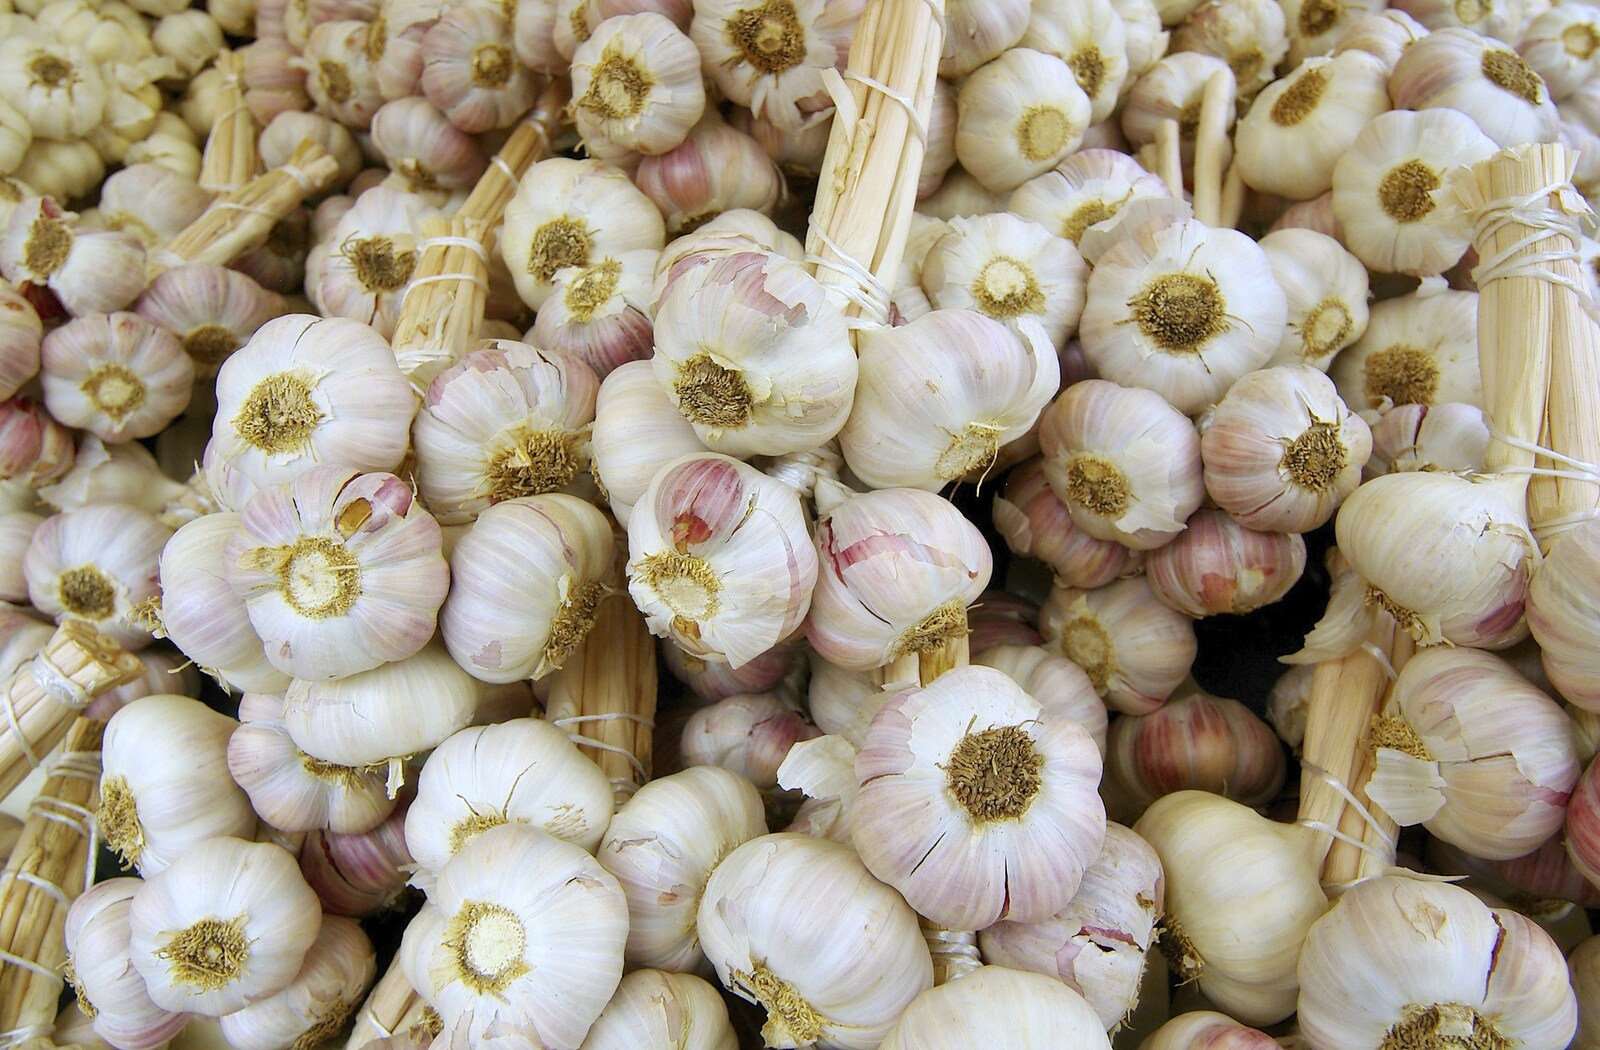 Cloves of garlic from A French Market Visits, Diss, Norfolk - 24th June 2006